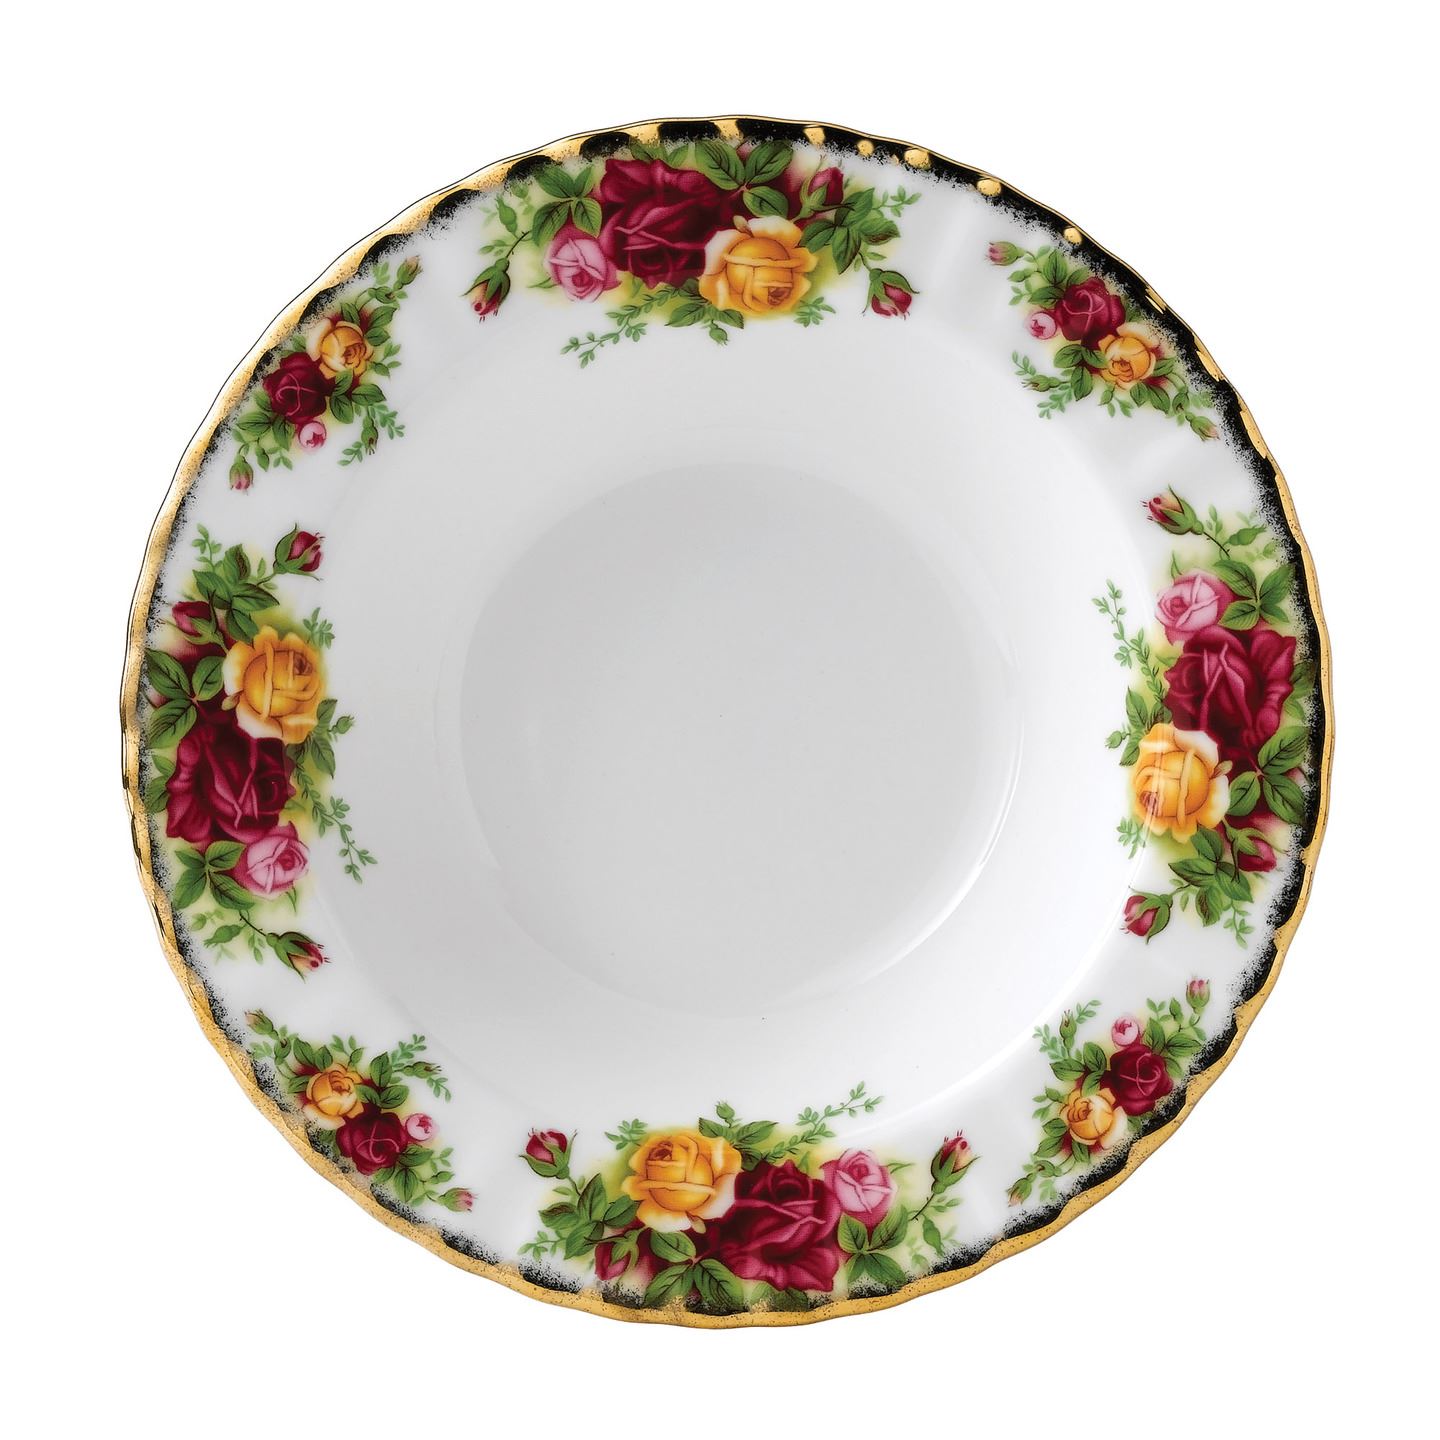 1 x NEW ROYAL ALBERT OLD COUNTRY ROSES 16cm SAUCER 